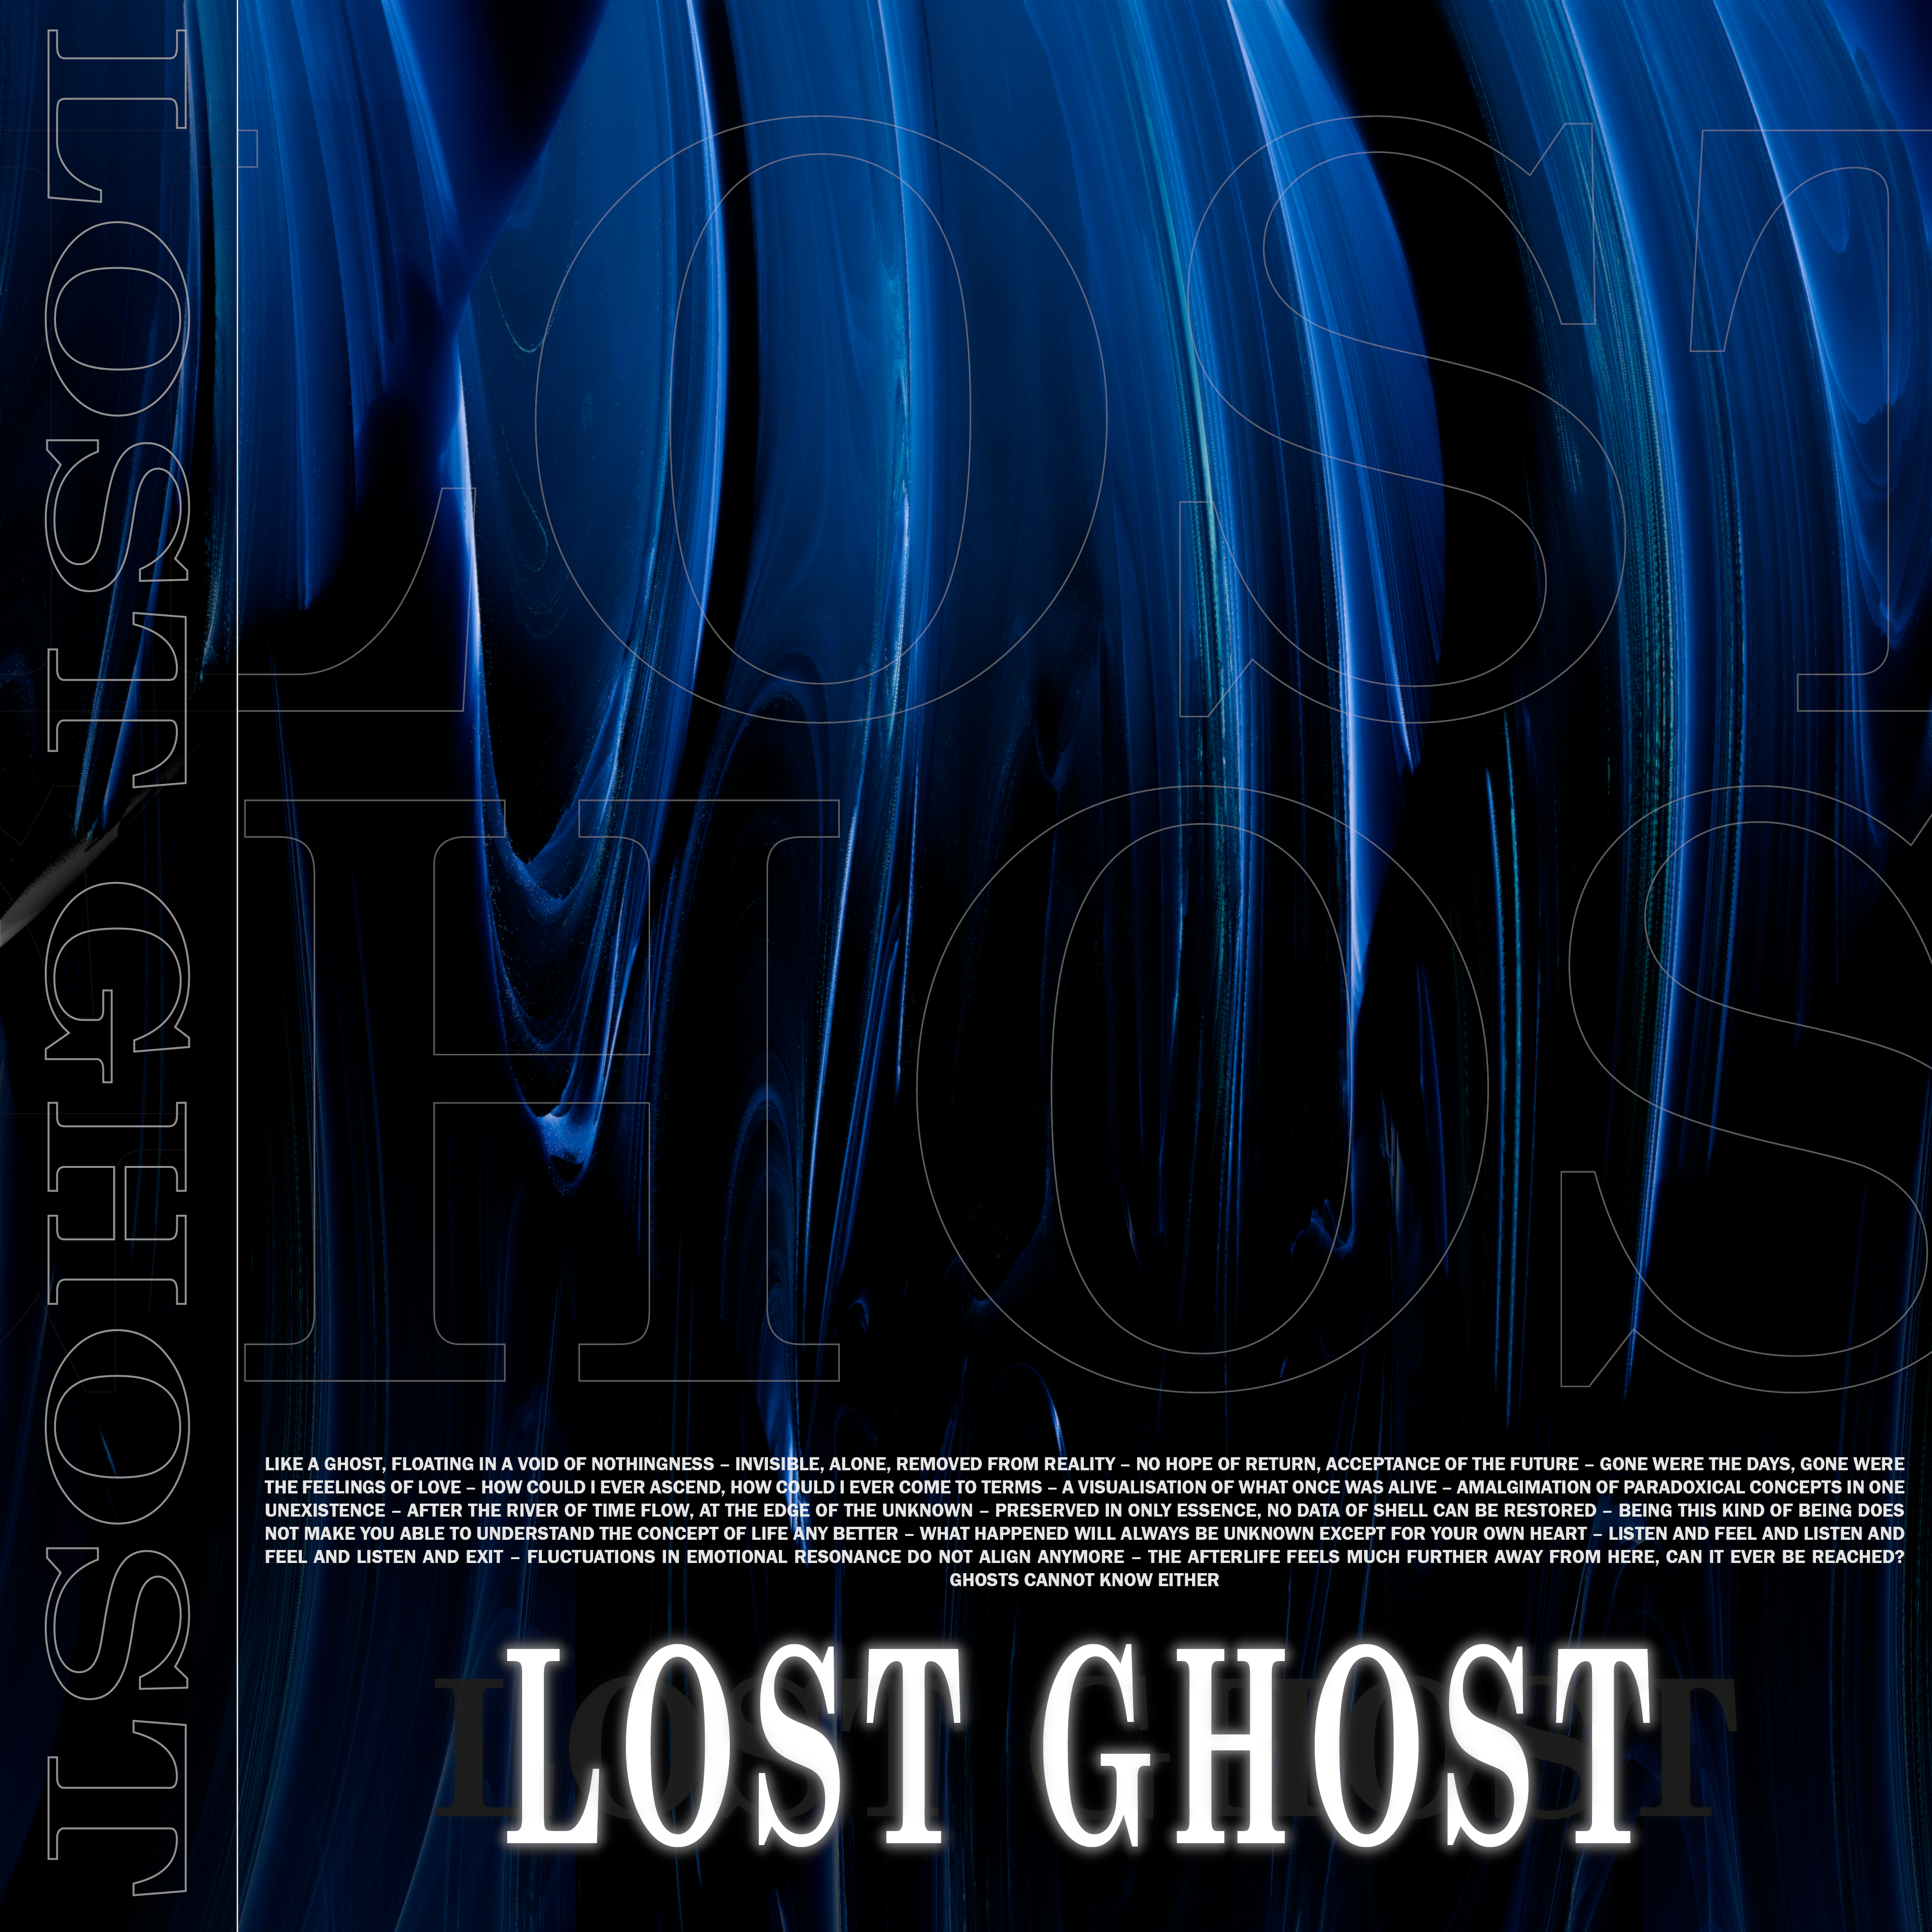 Lost Ghost - Fake cover art